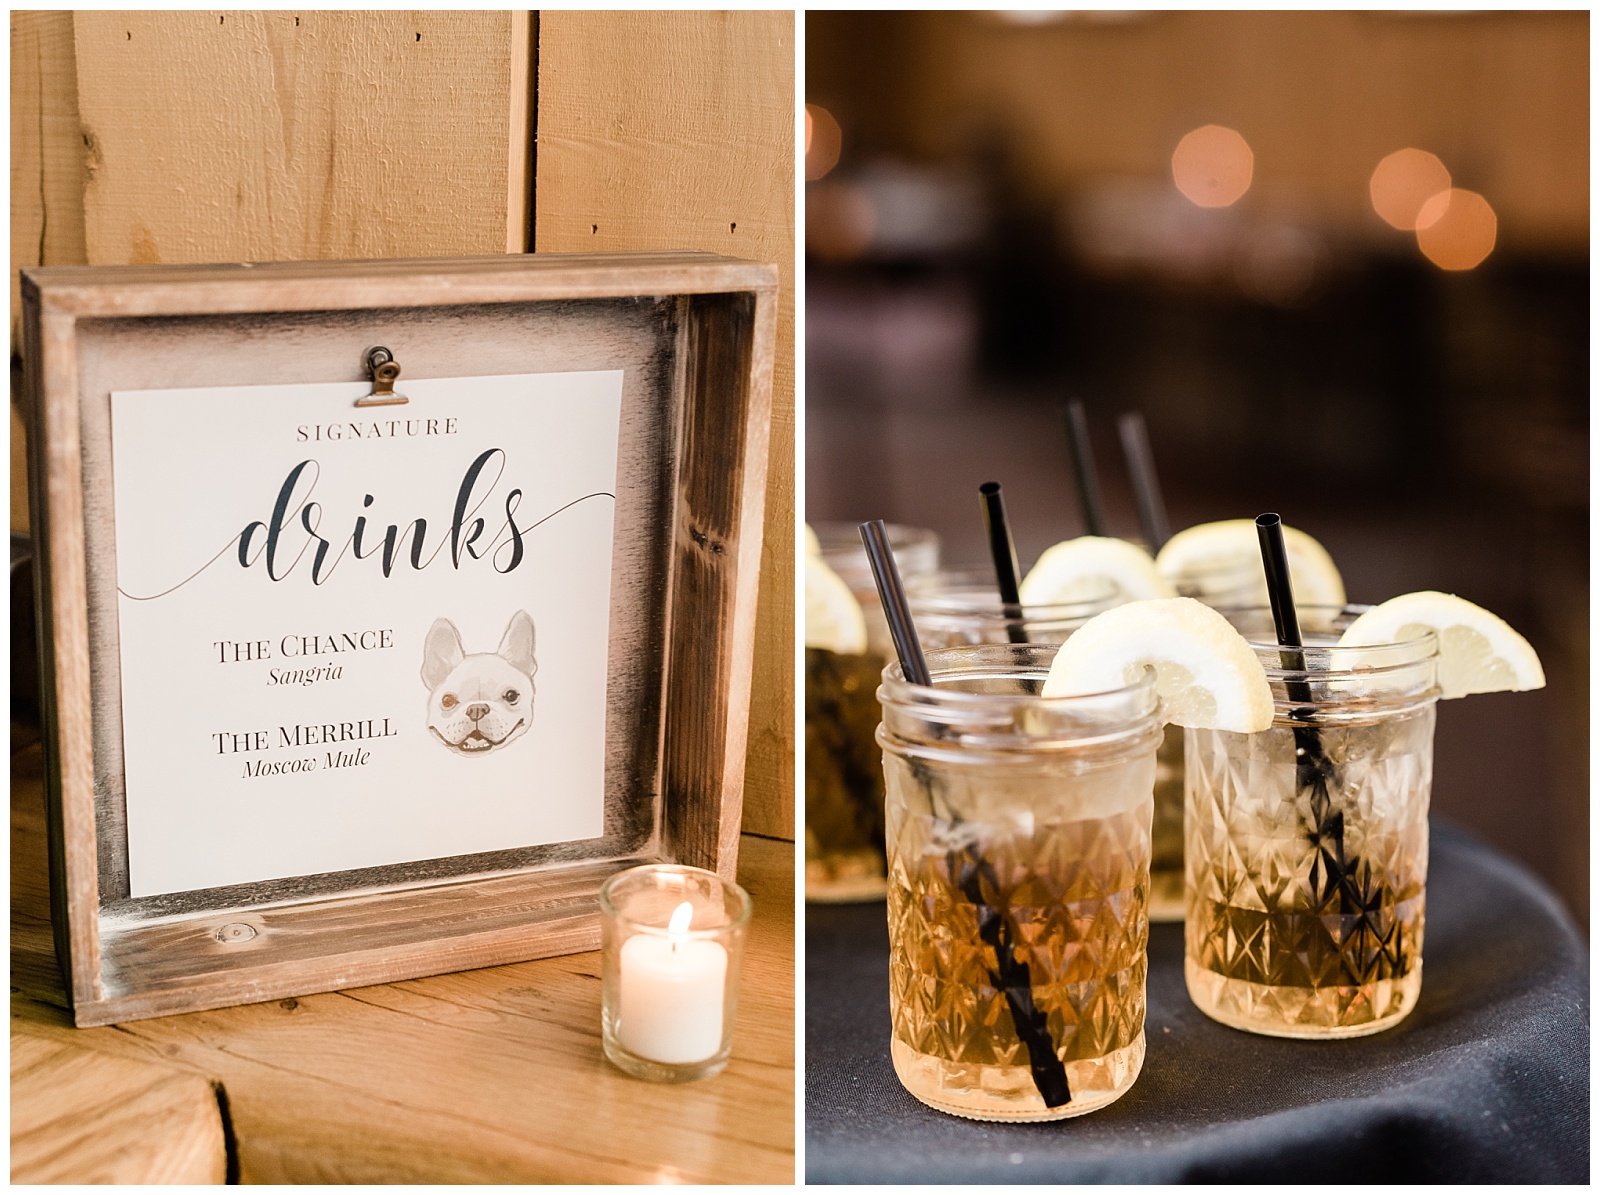 Signature drink sign featuring a french bulldog illustration paired with drinks in mason jar glasses.